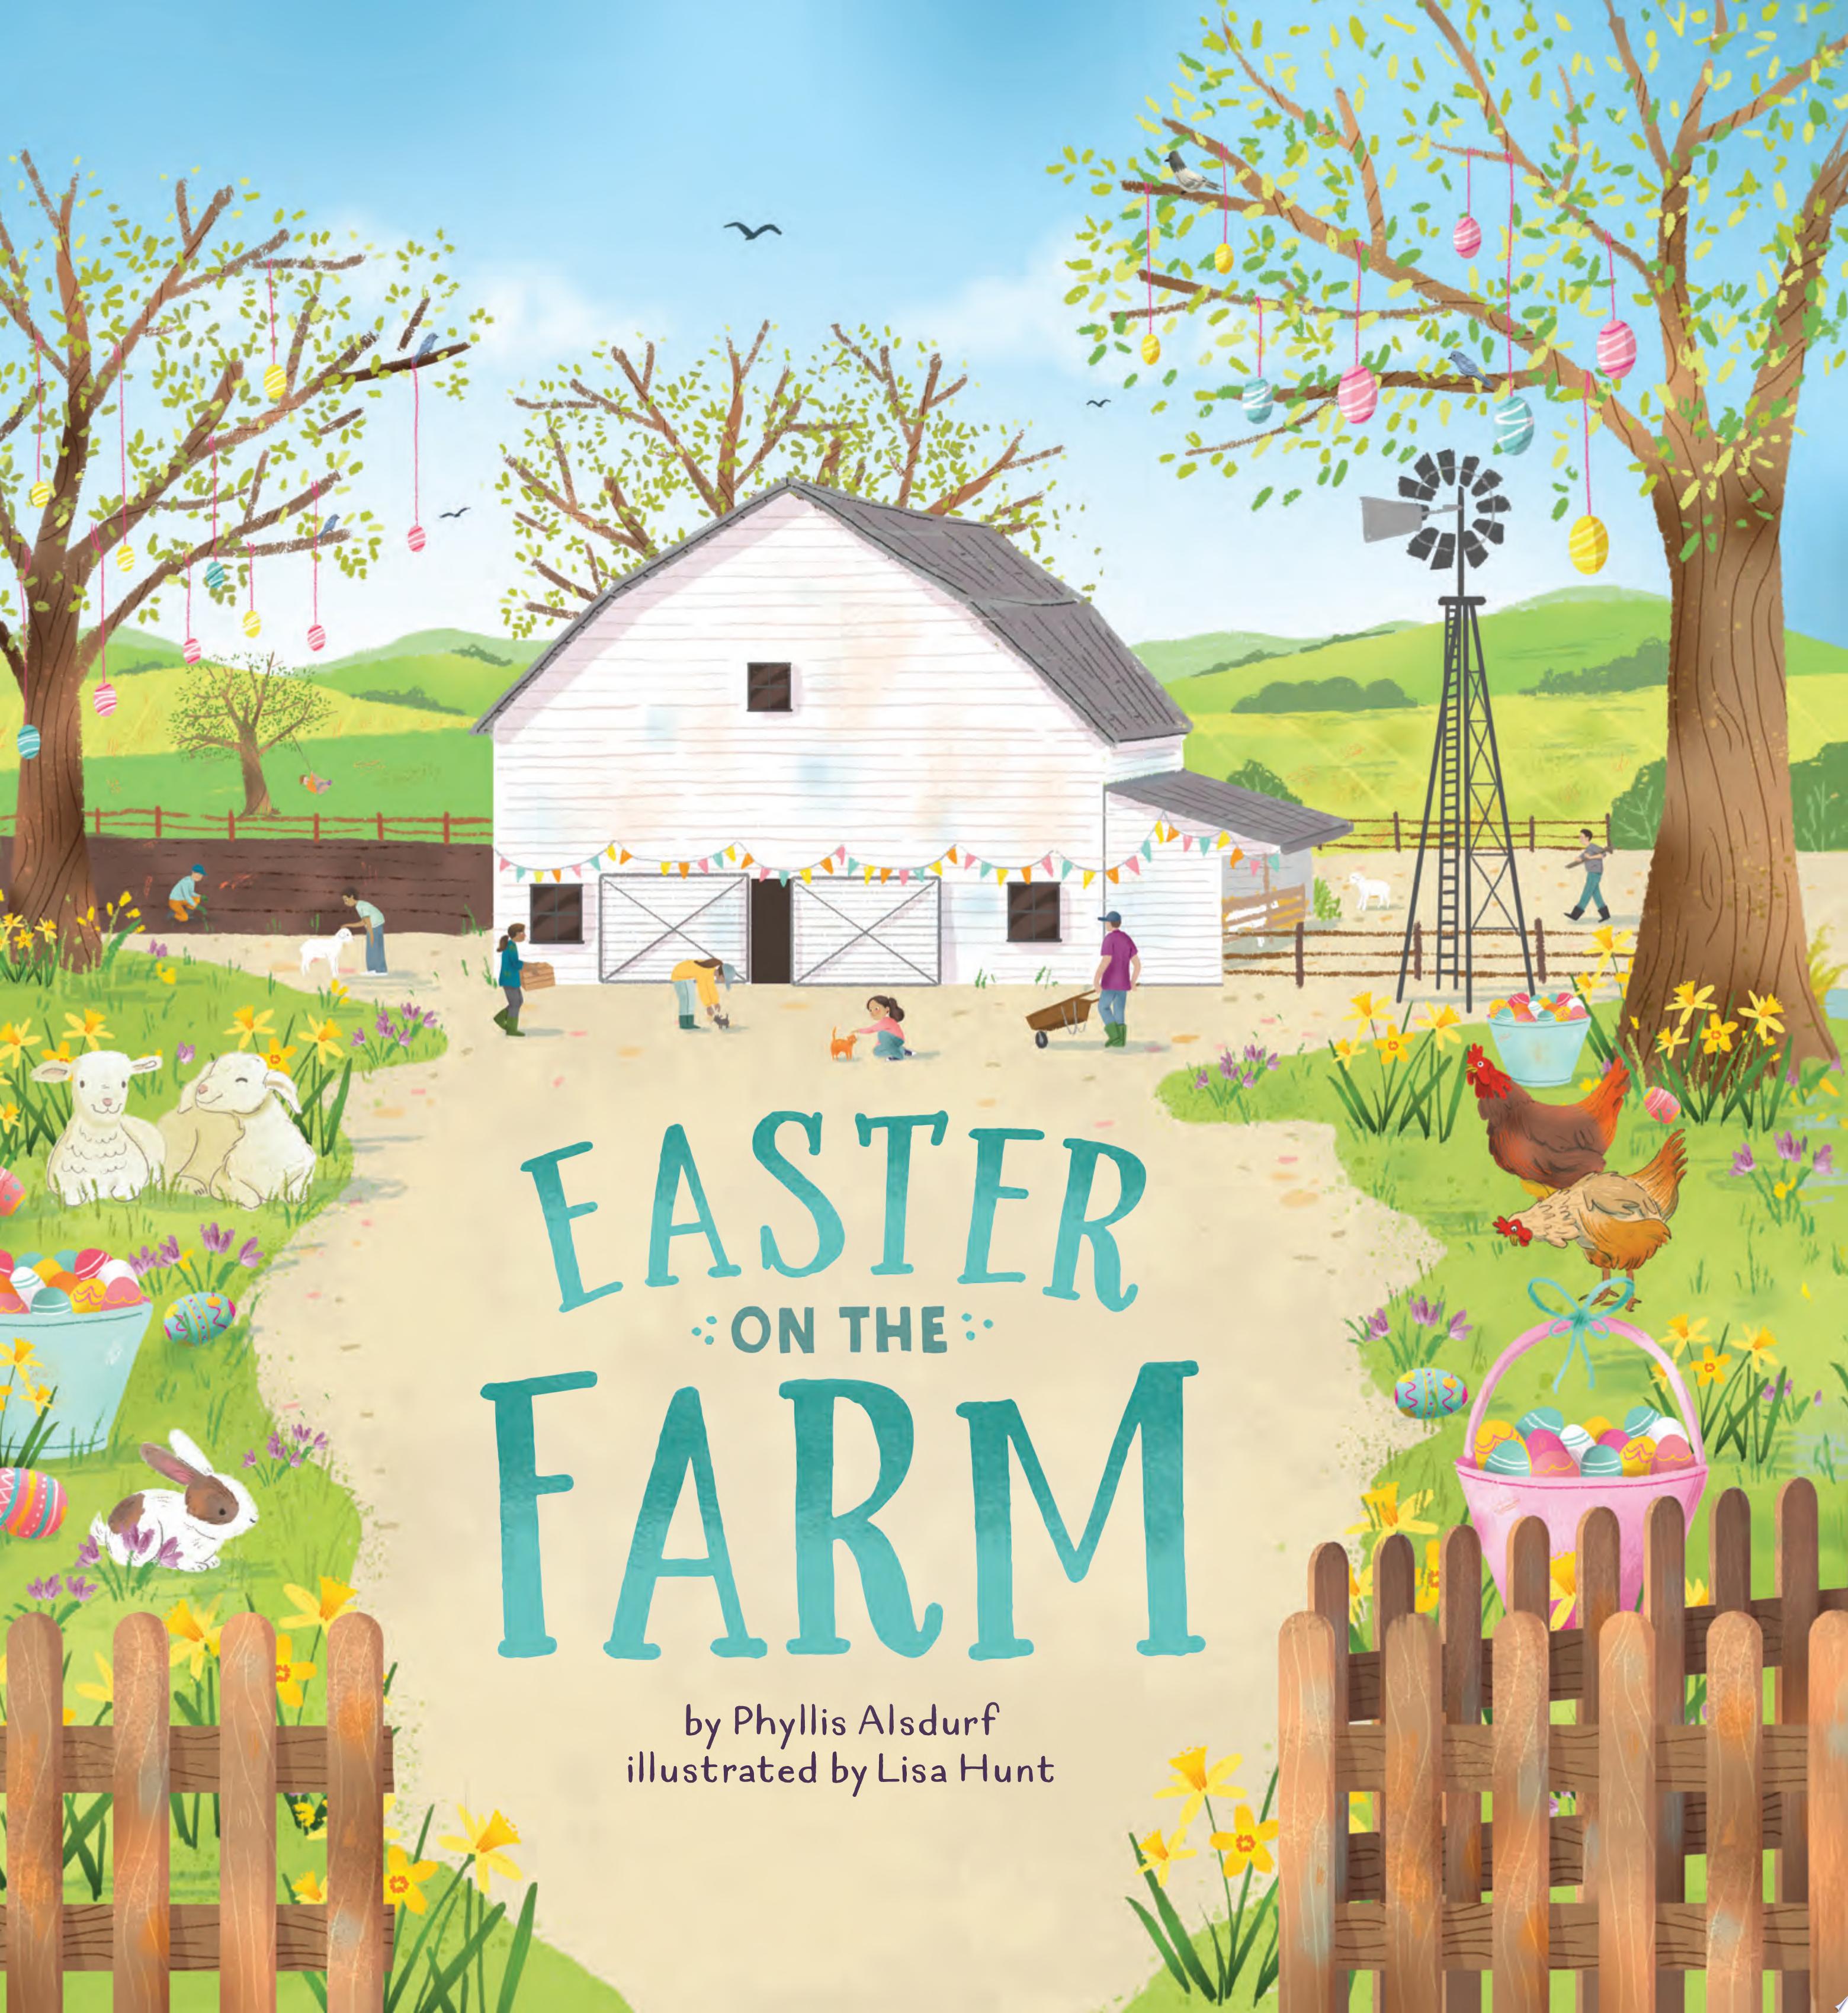 Image for "Easter on the Farm"